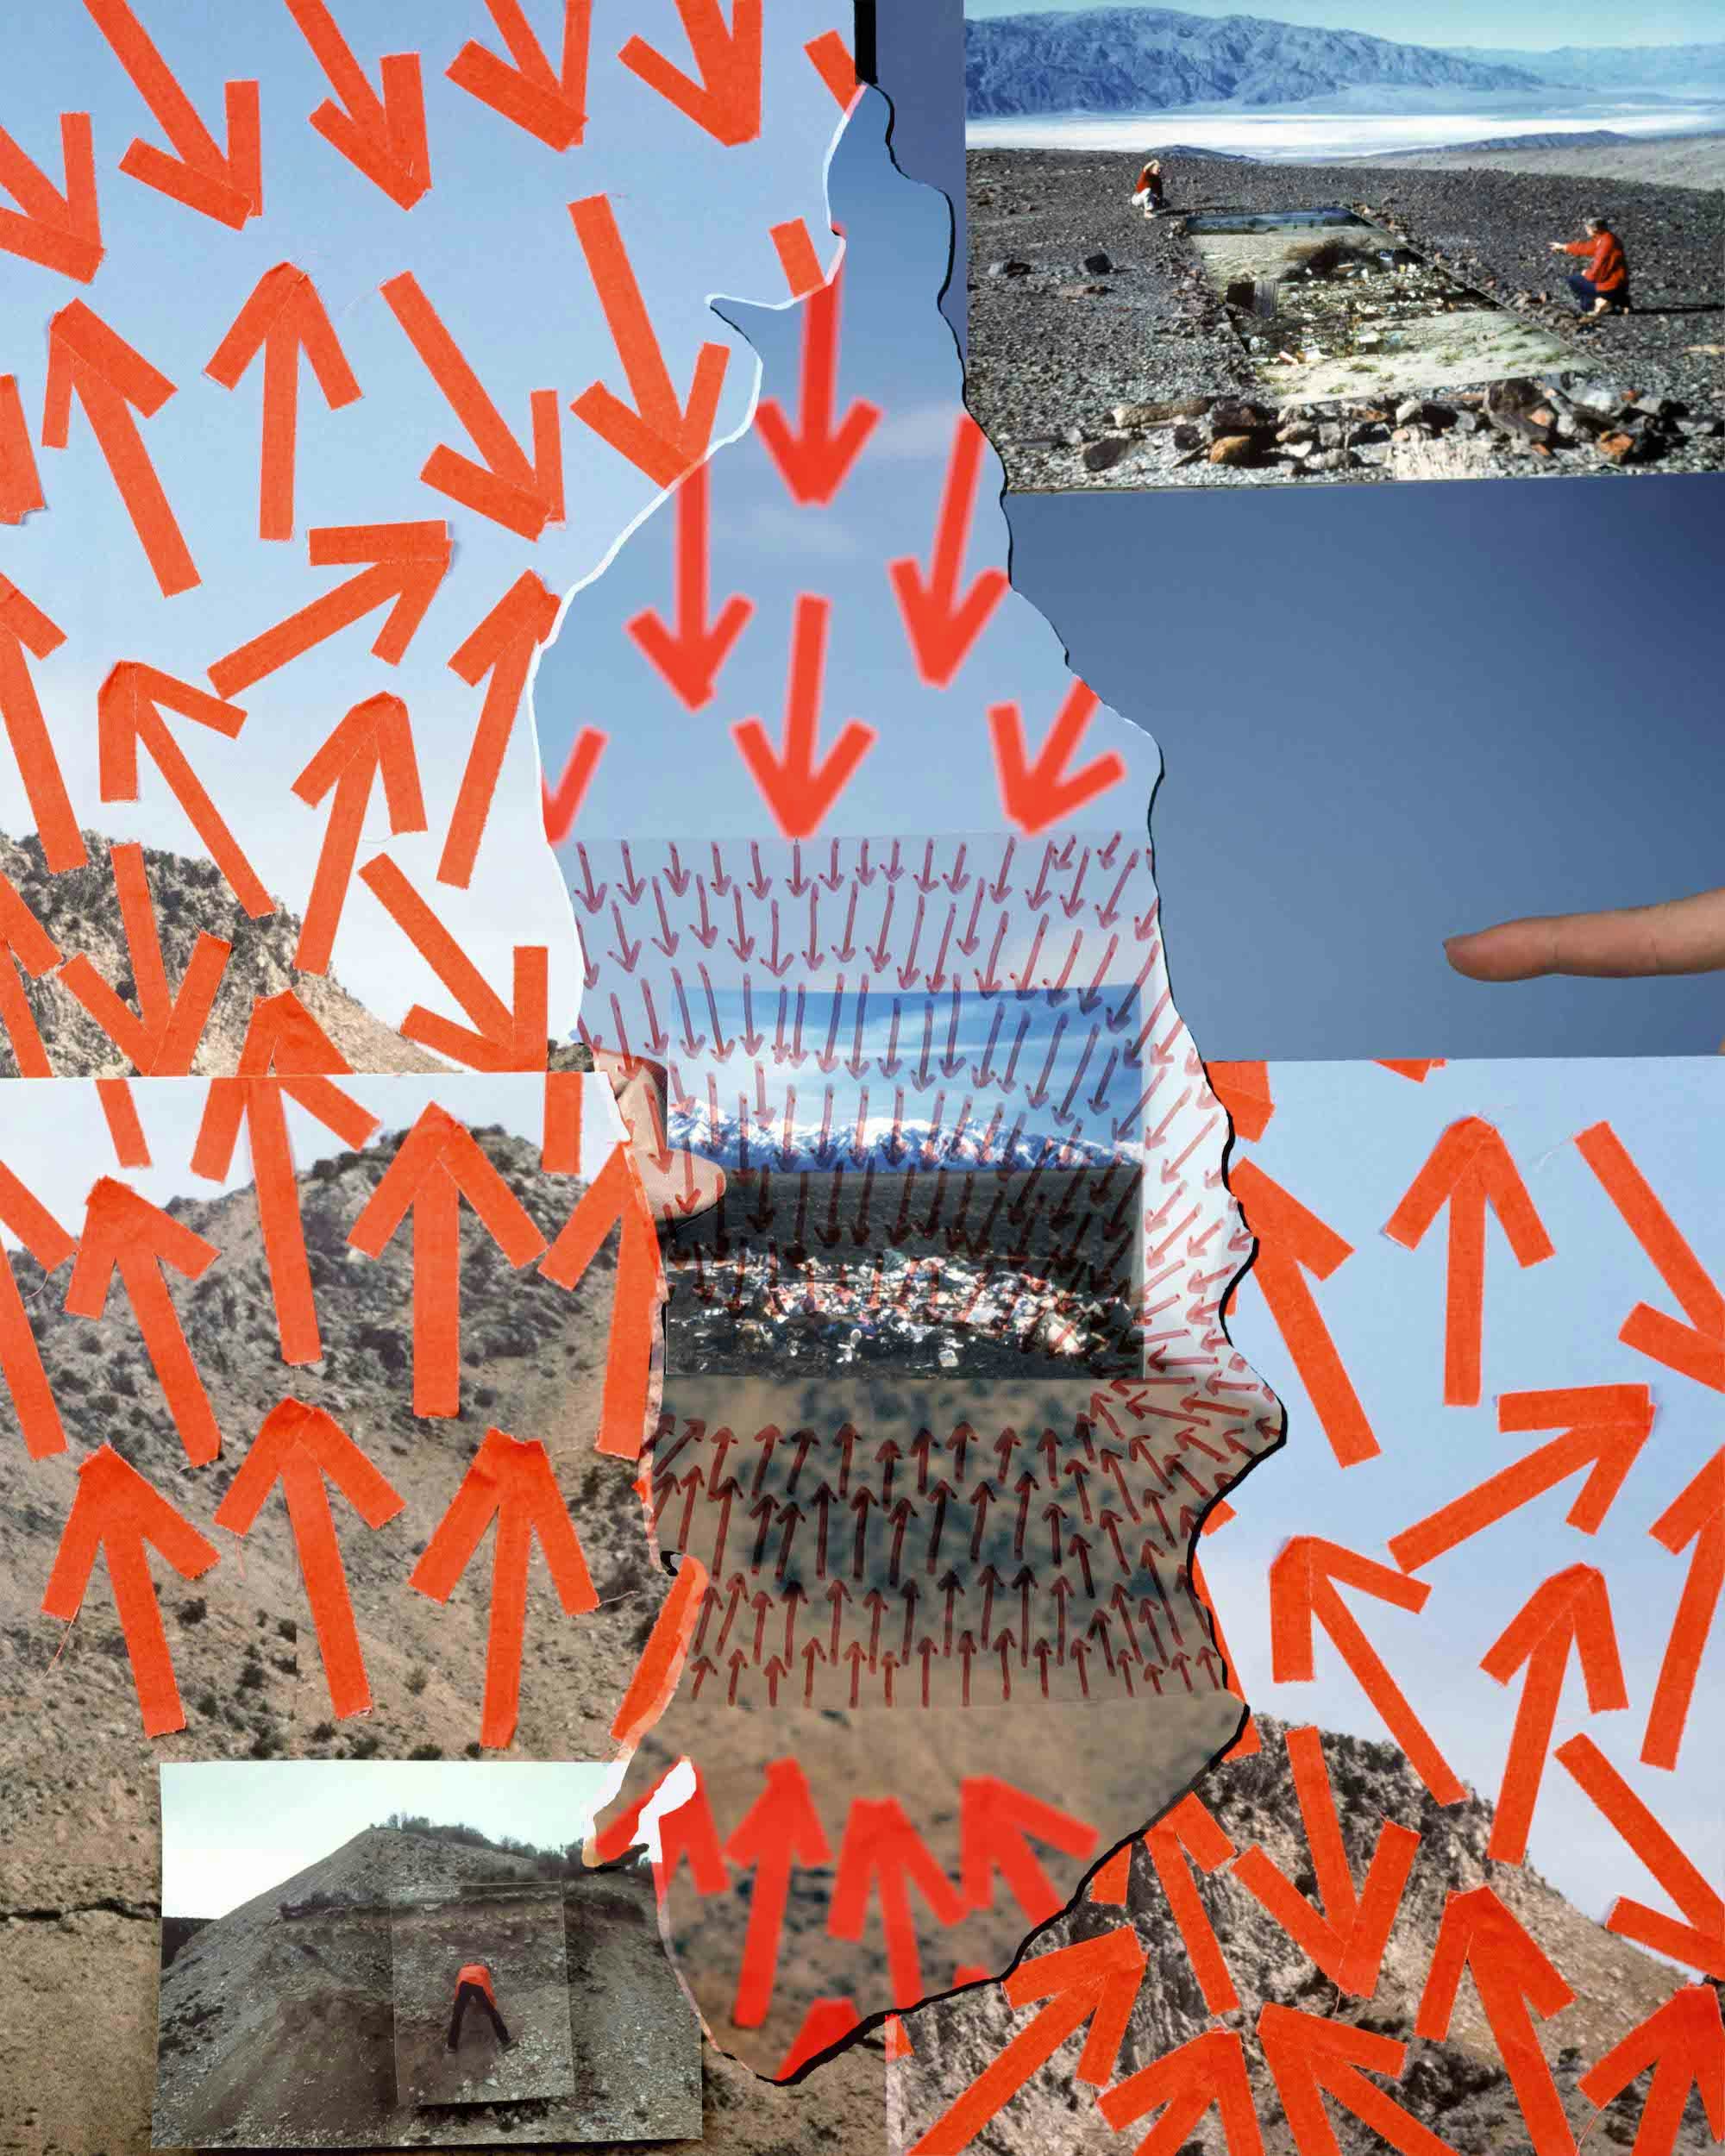 Collage of several images of West Desert landscapes, covered in orange arrows. © Jaclyn Wright